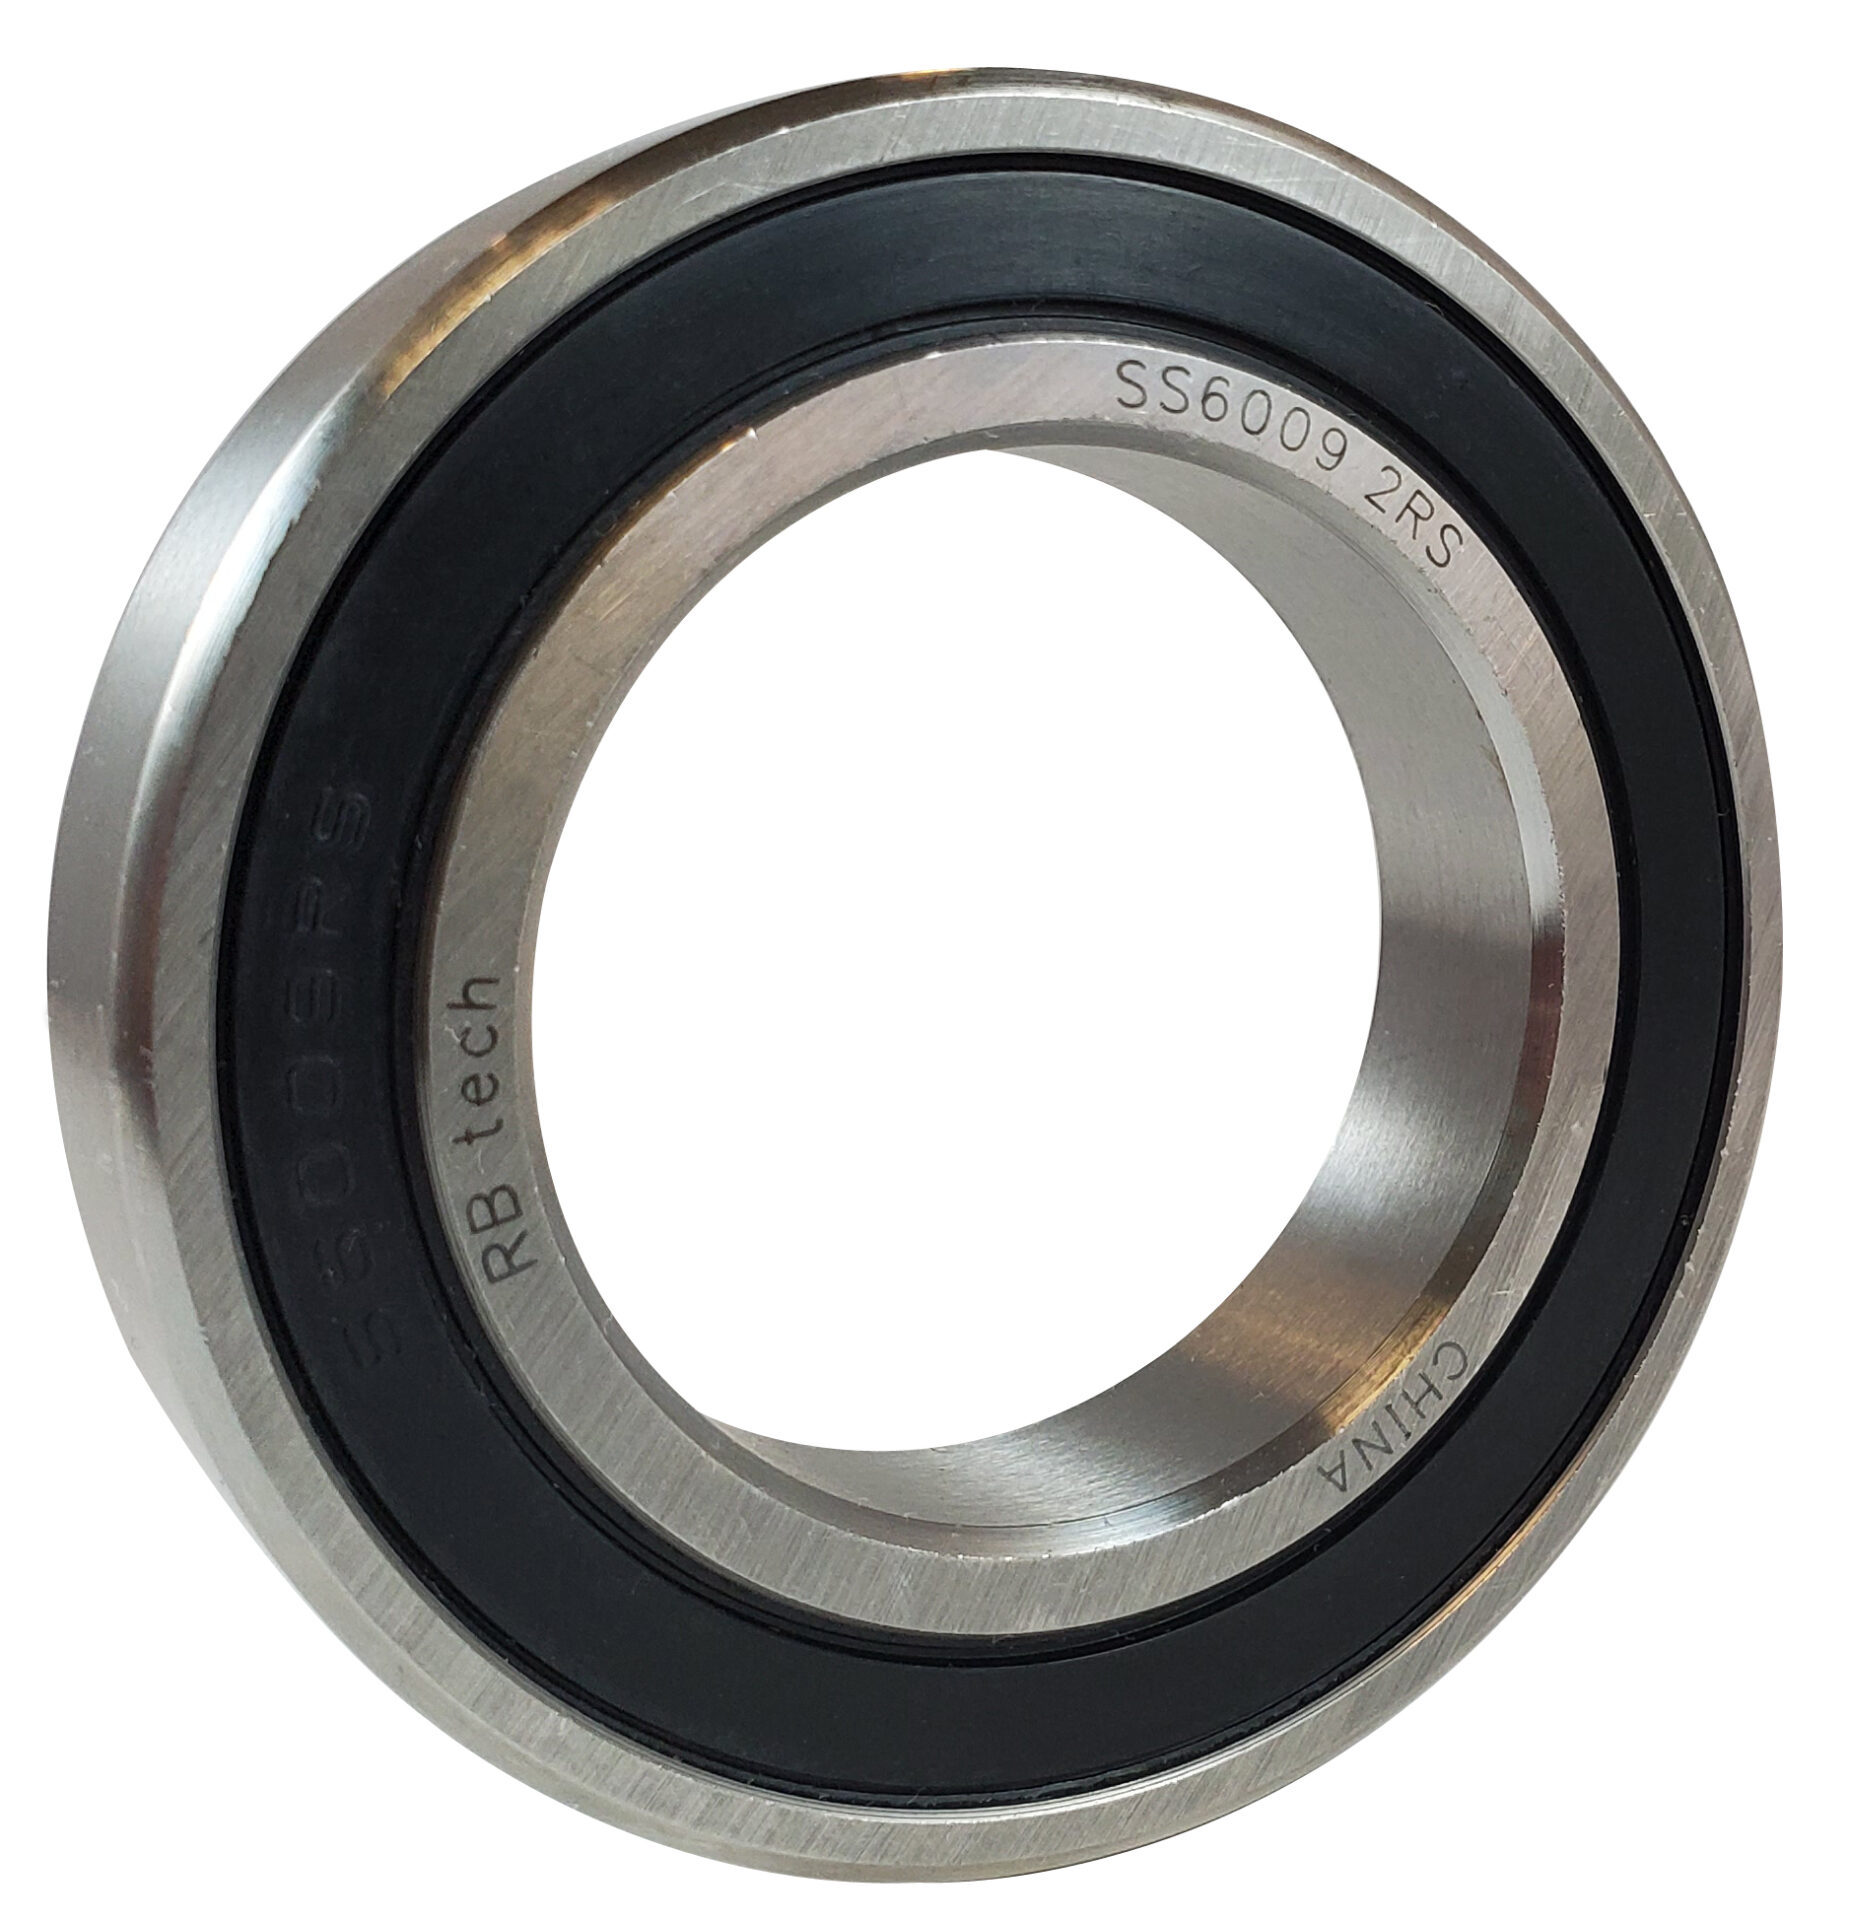 STAINLESS STEEL BEARINGS SS6000-SS6006 2RS SERIES RUBBER SEALED 